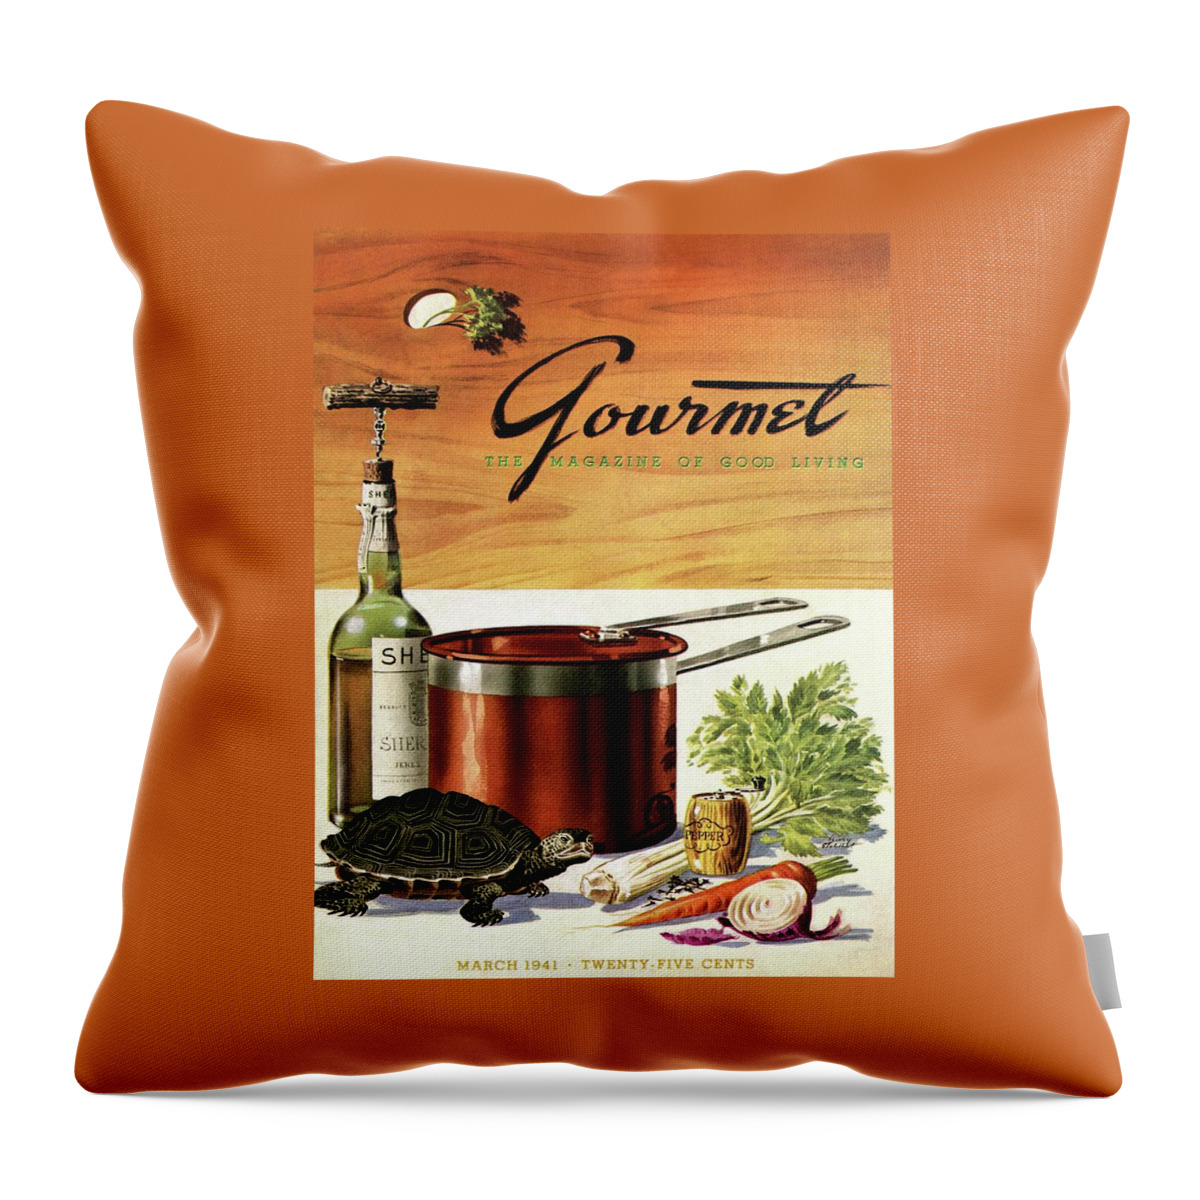 A Gourmet Cover Of Turtle Soup Ingredients Throw Pillow